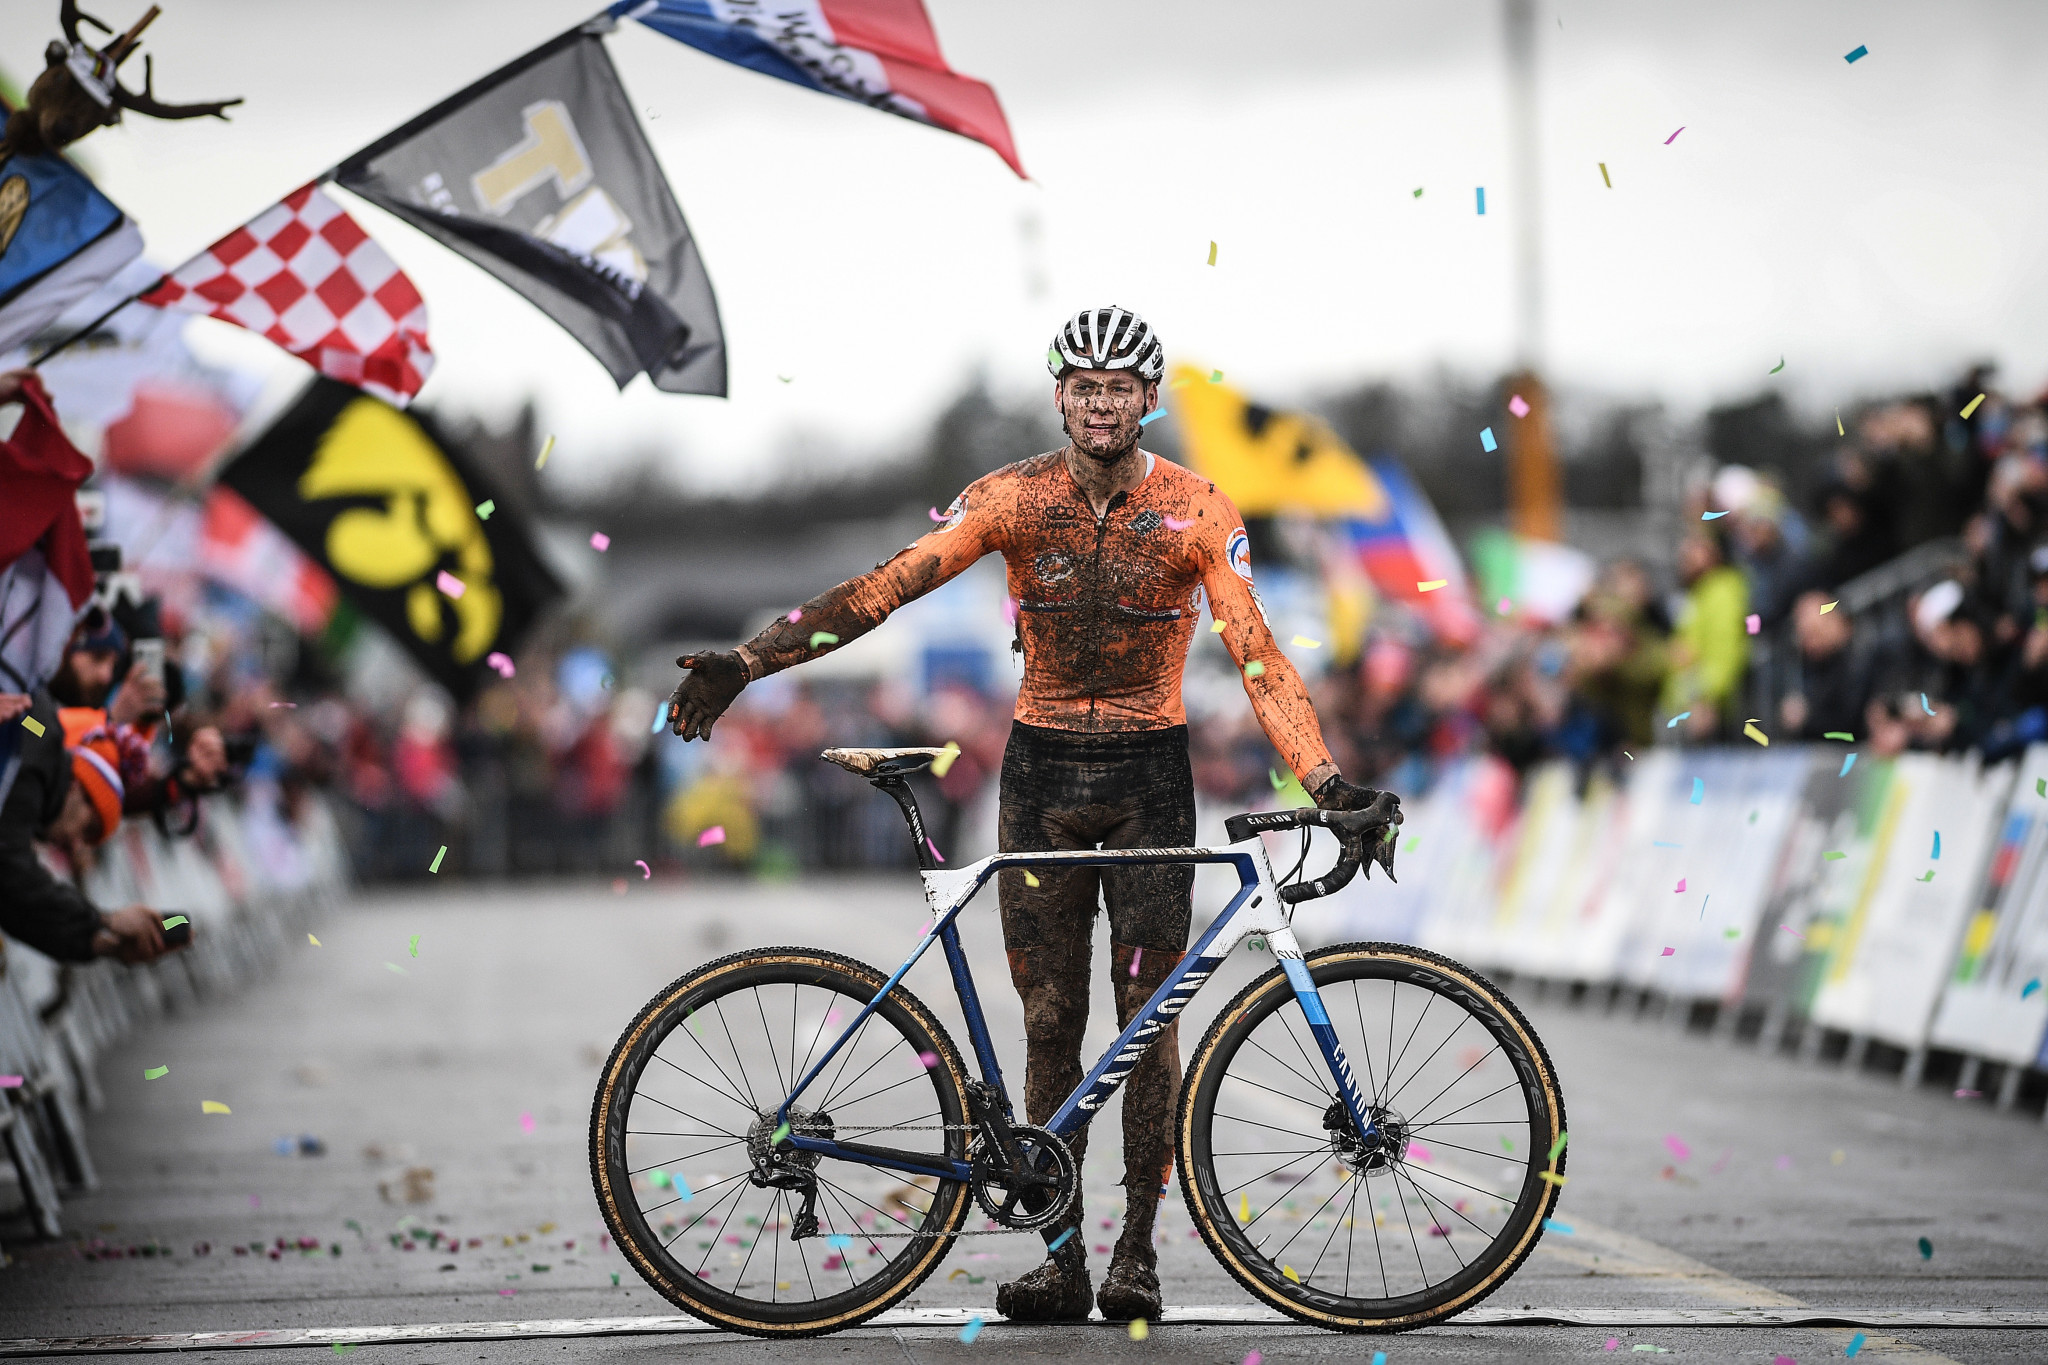 Mathieu van der Poel achieved his third UCI Cyclo-cross World Championship title ©Getty Images